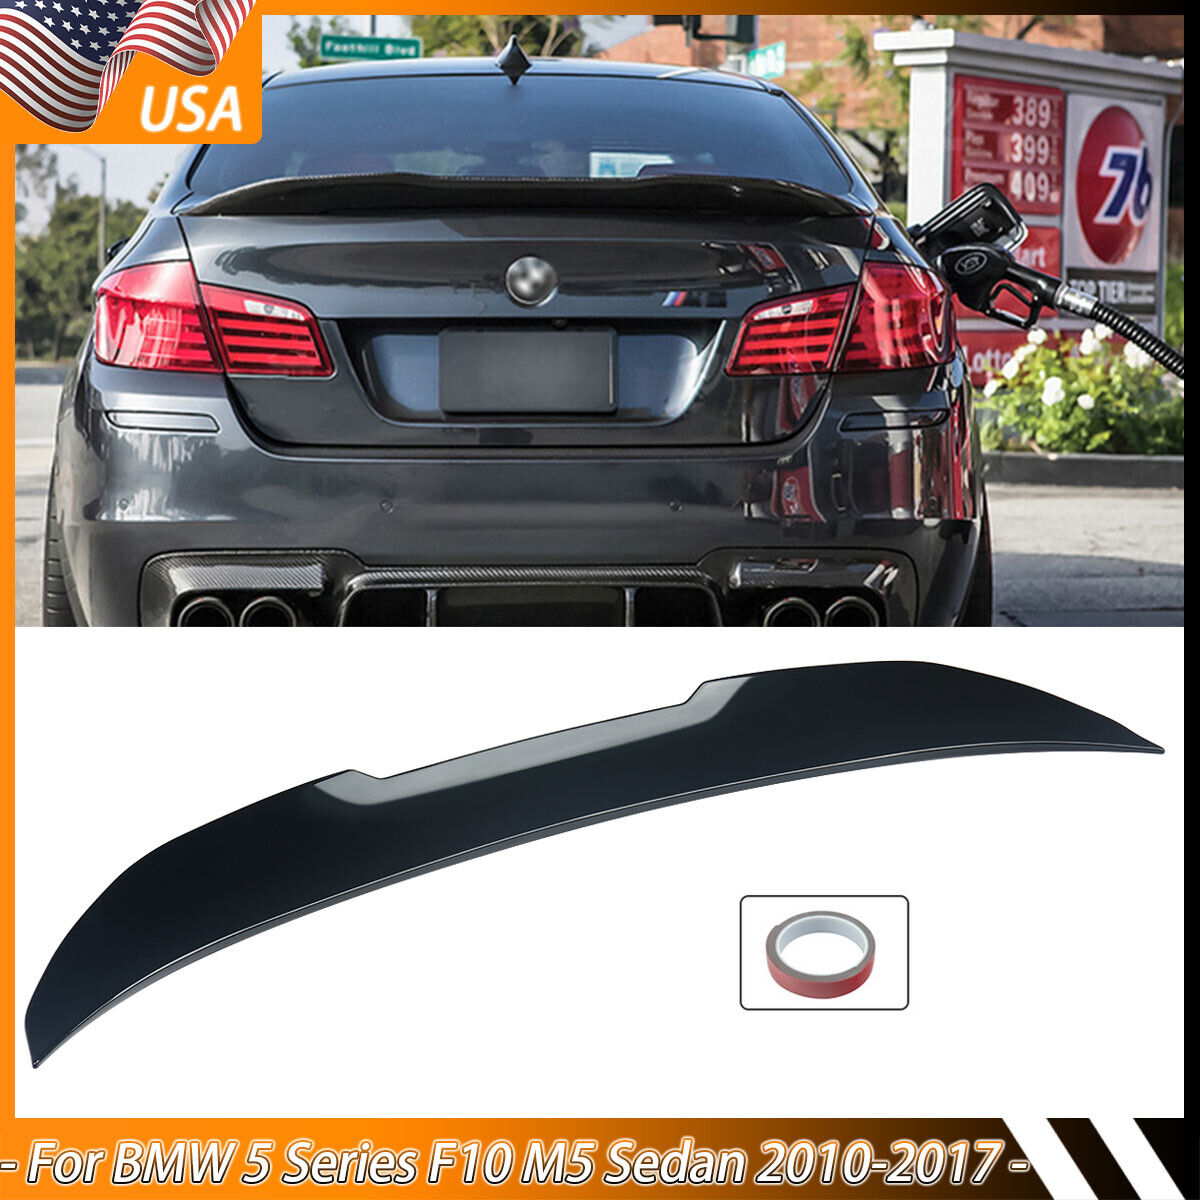 Gloss Black PSM Style Rear Spoiler Lip Wing For BMW 5 Series F10 M5 2010-2017